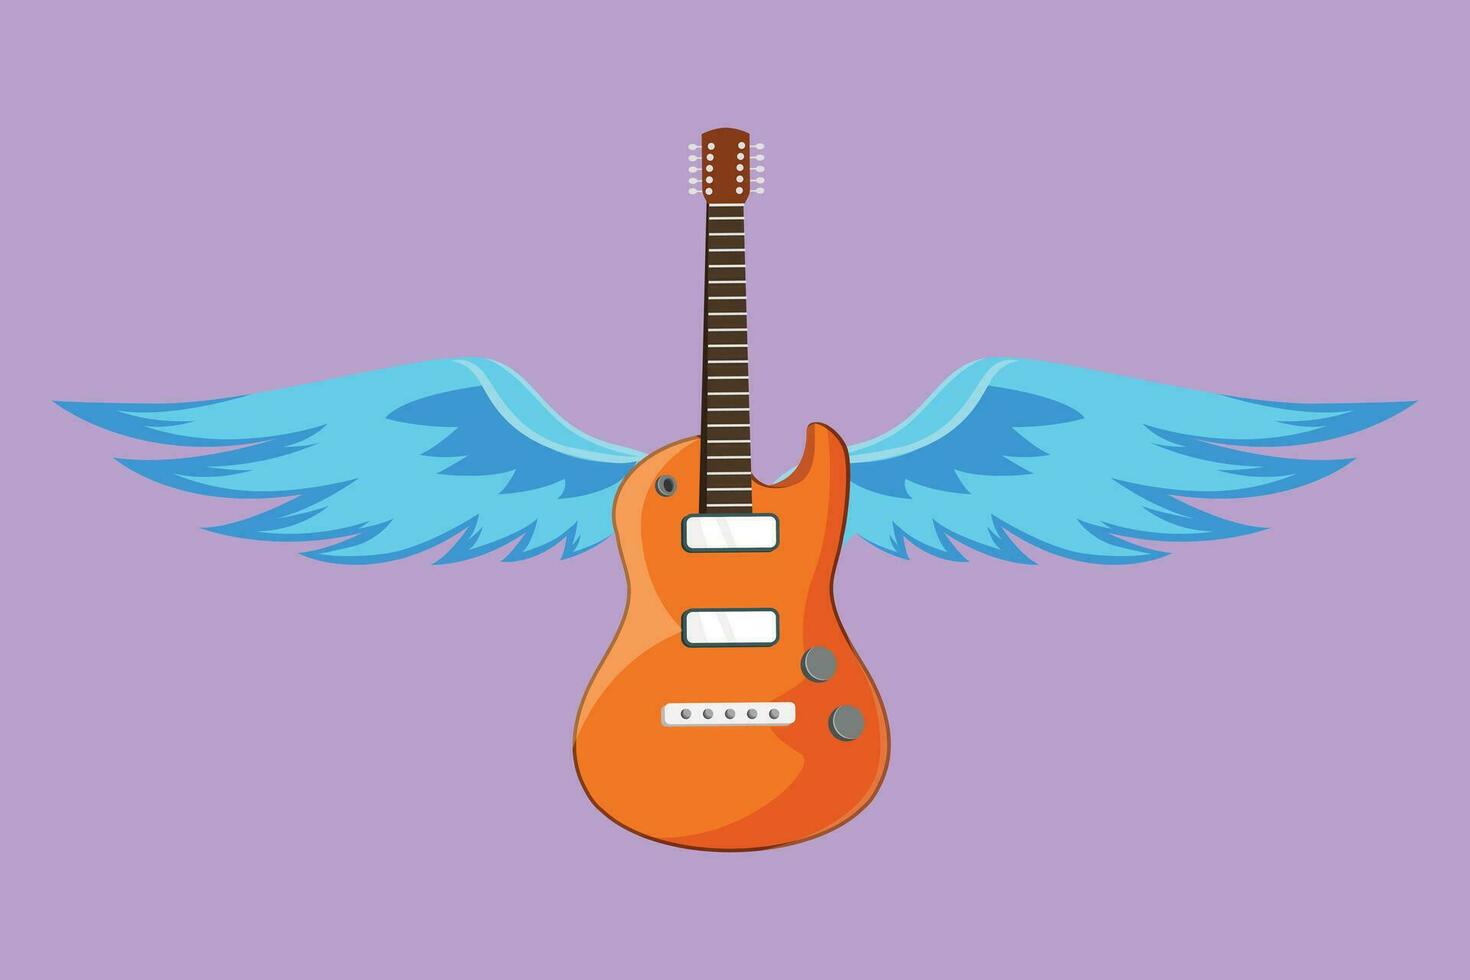 Character flat drawing guitar musical emblem with wings for festival music performance. Musical instrument. Rock and roll concert. Acoustic guitar with wings logo. Cartoon design vector illustration